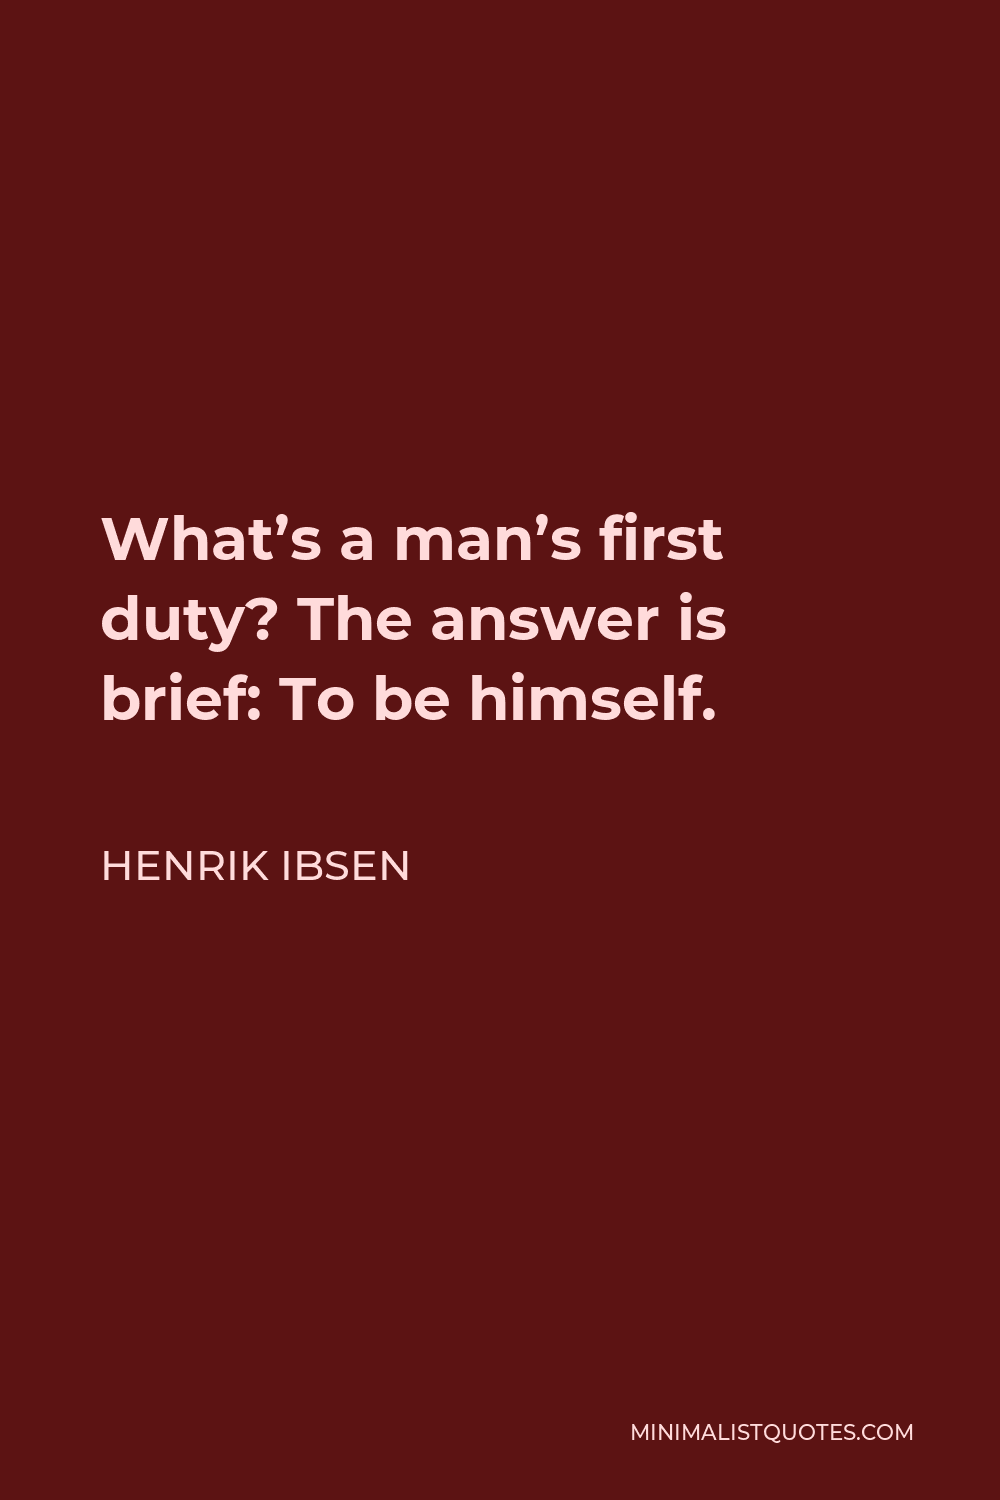 Henrik Ibsen Quote - What’s a man’s first duty? The answer is brief: To be himself.